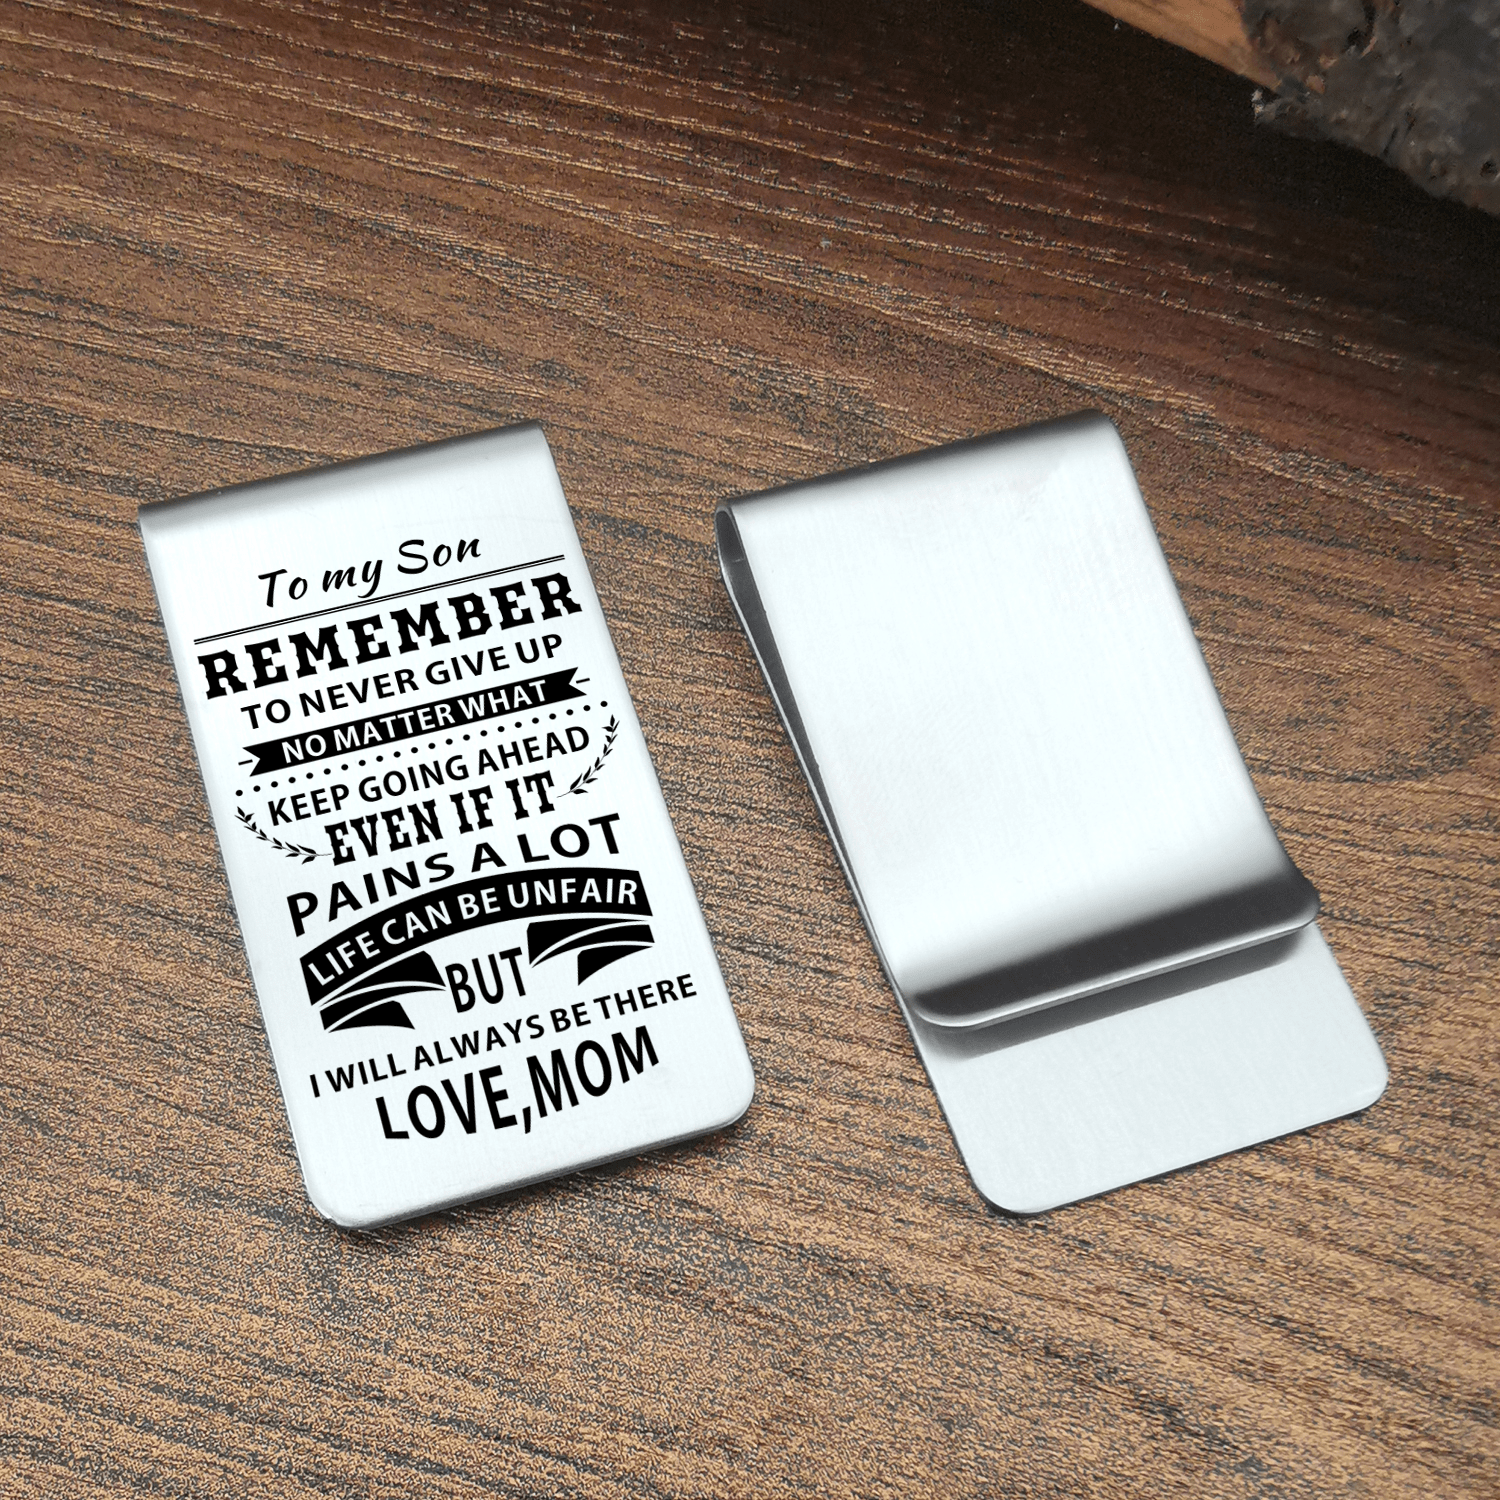 Money Clips Mom To Son - I Will Always Be There Engraved Money Clip GiveMe-Gifts